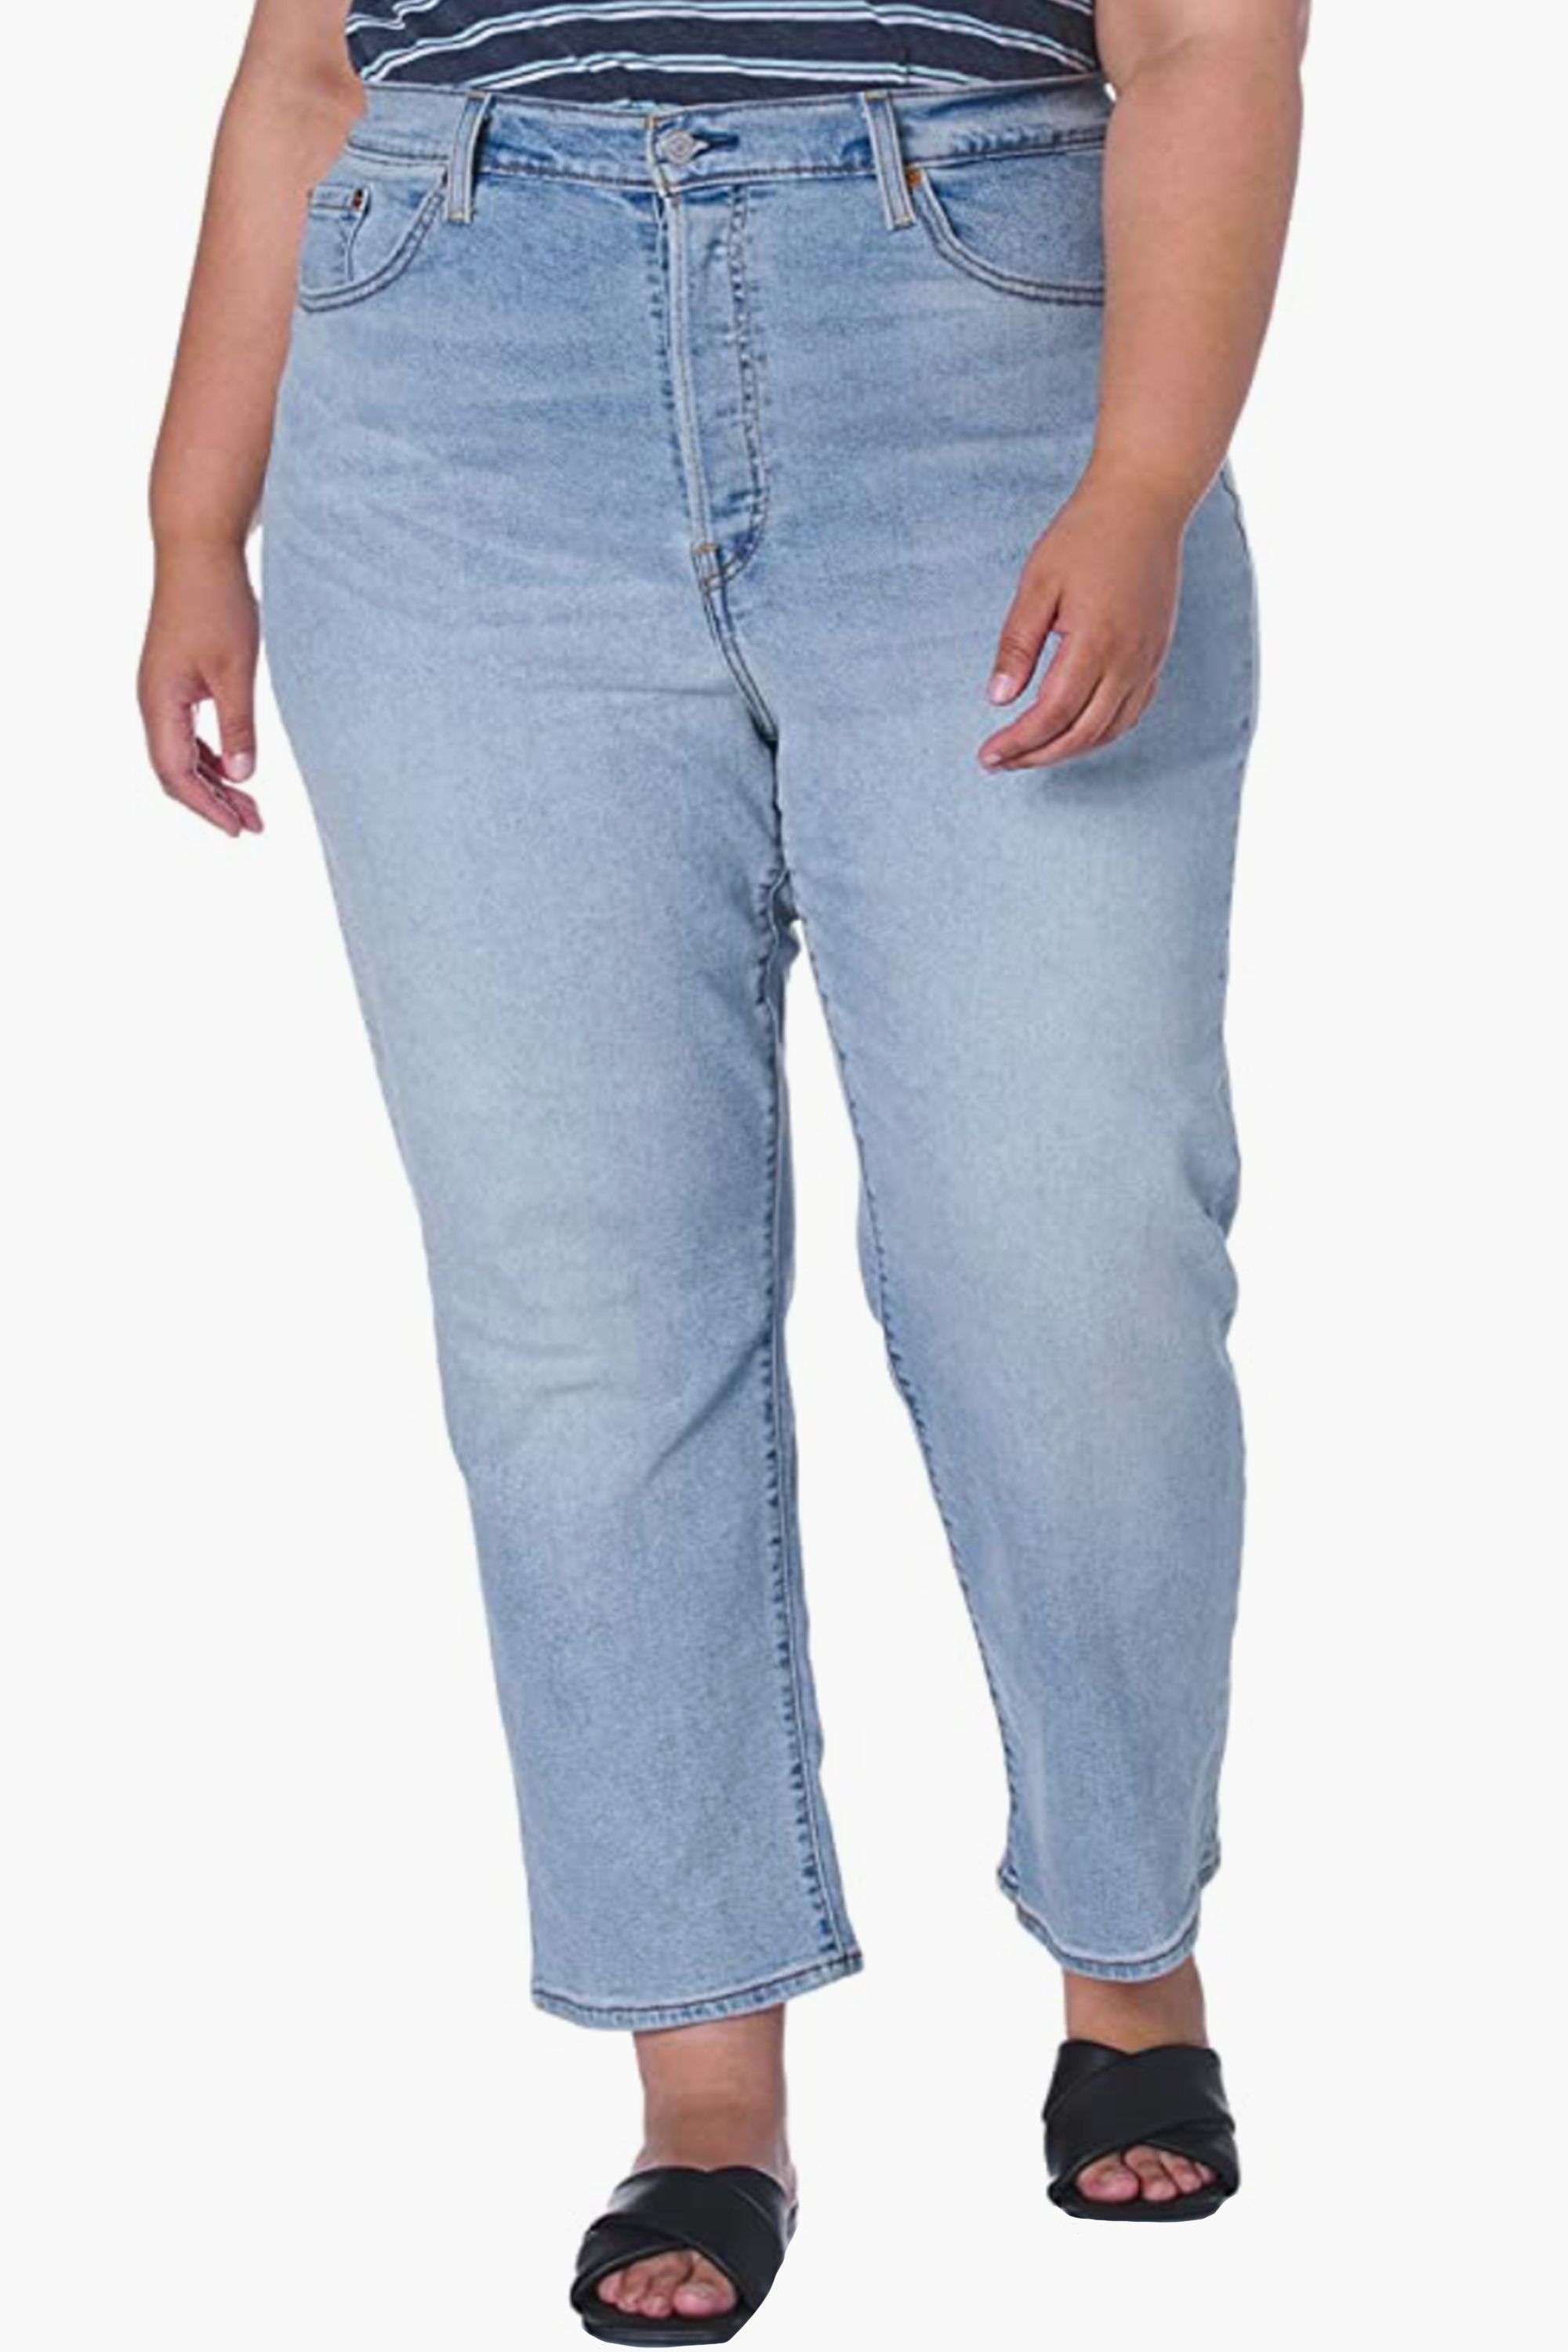 NWT Current/Elliott The Cropped Straight in Light Indigo Thick Cotton Jeans 25 